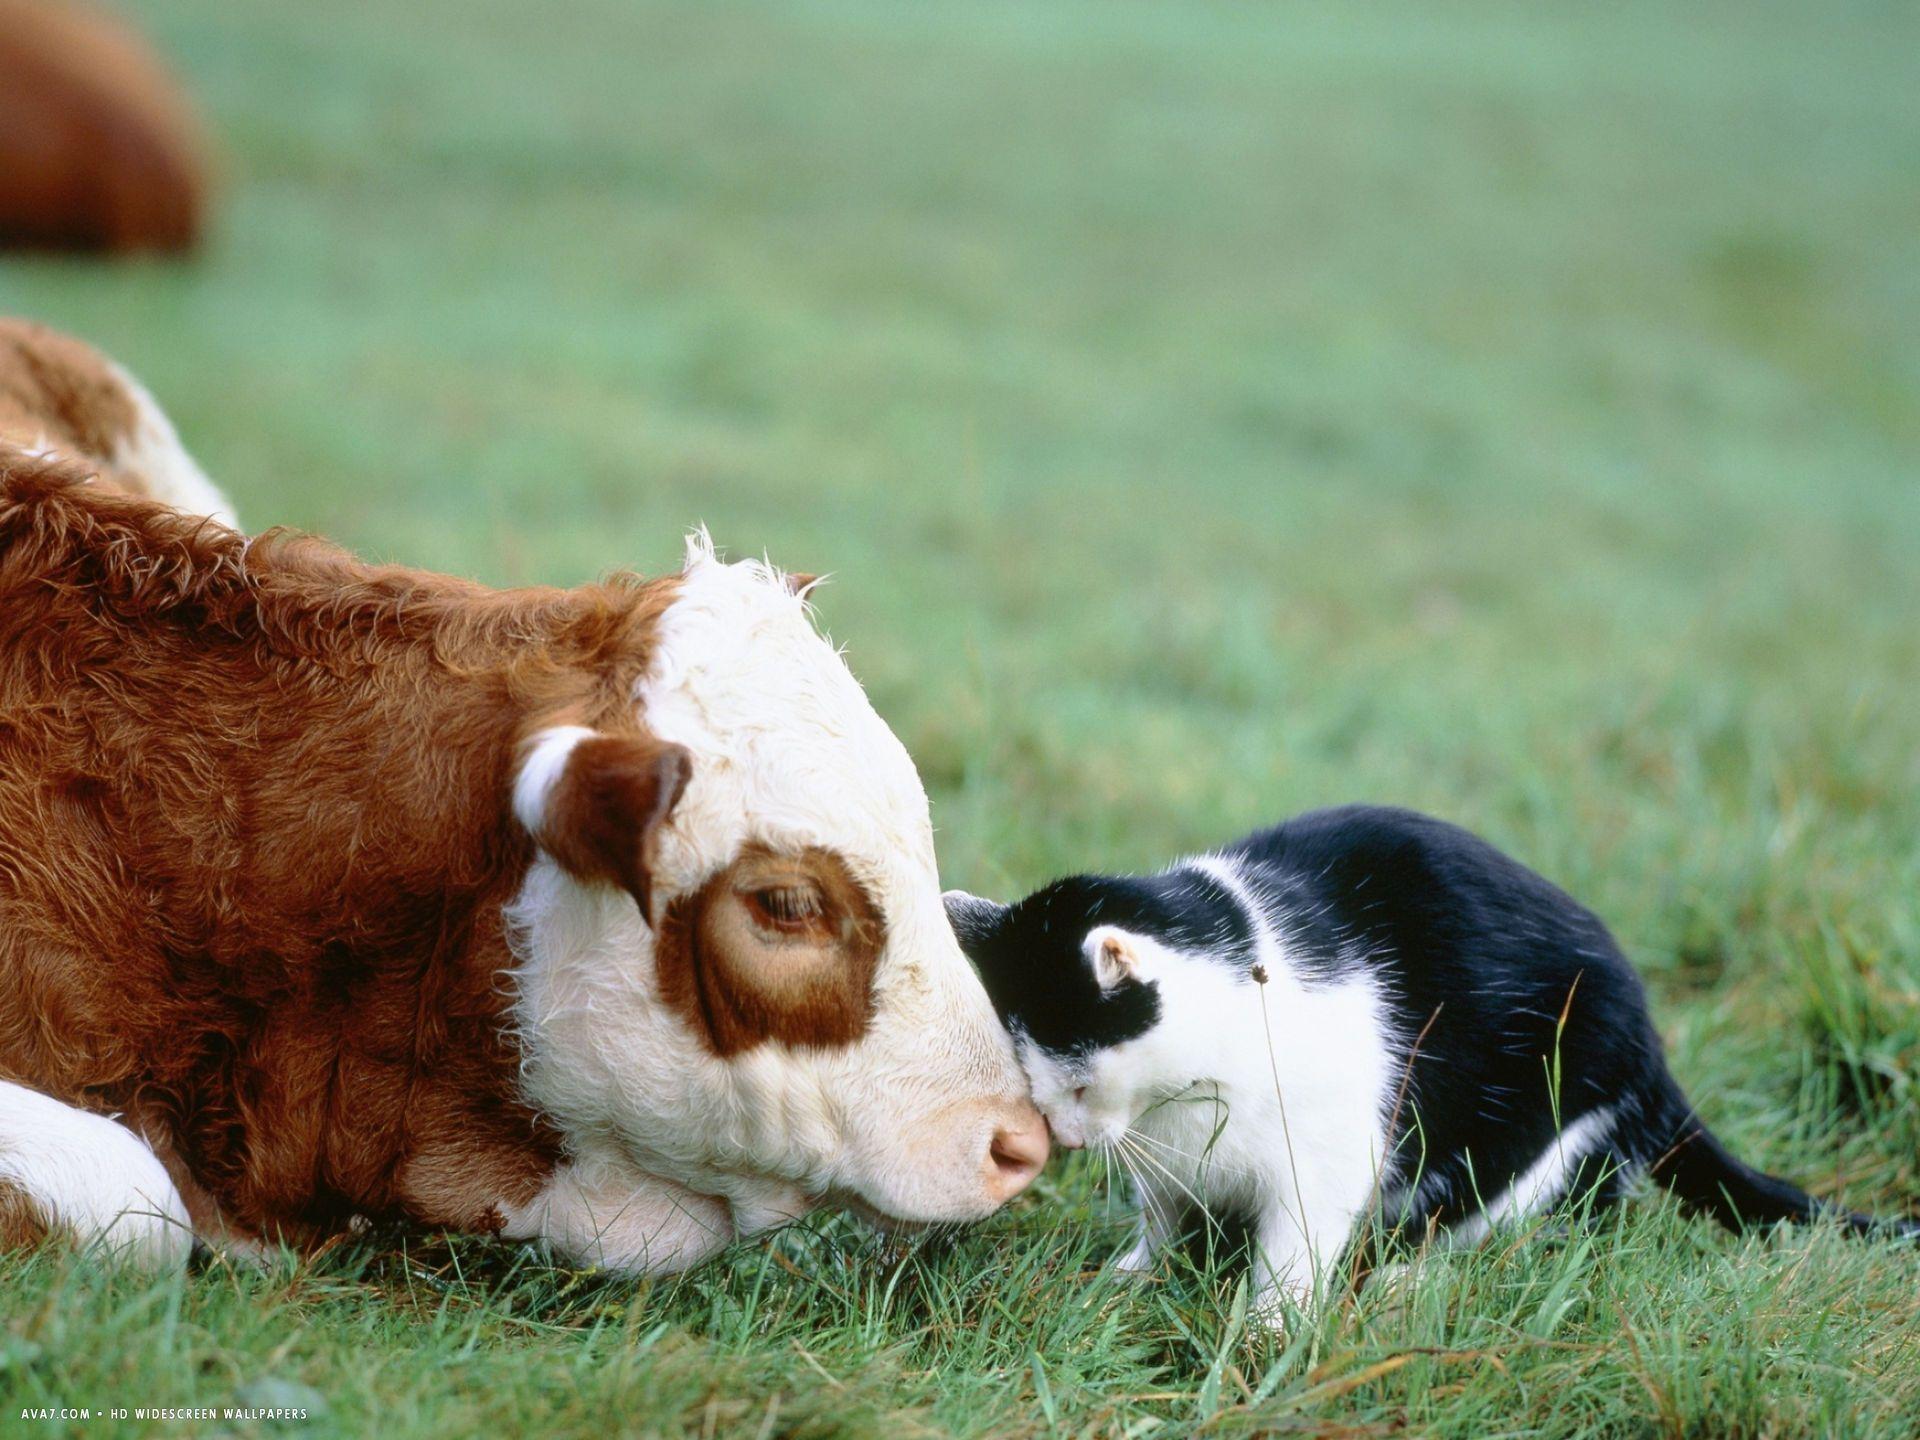 black and white cat and calf touching each other with heads. cats